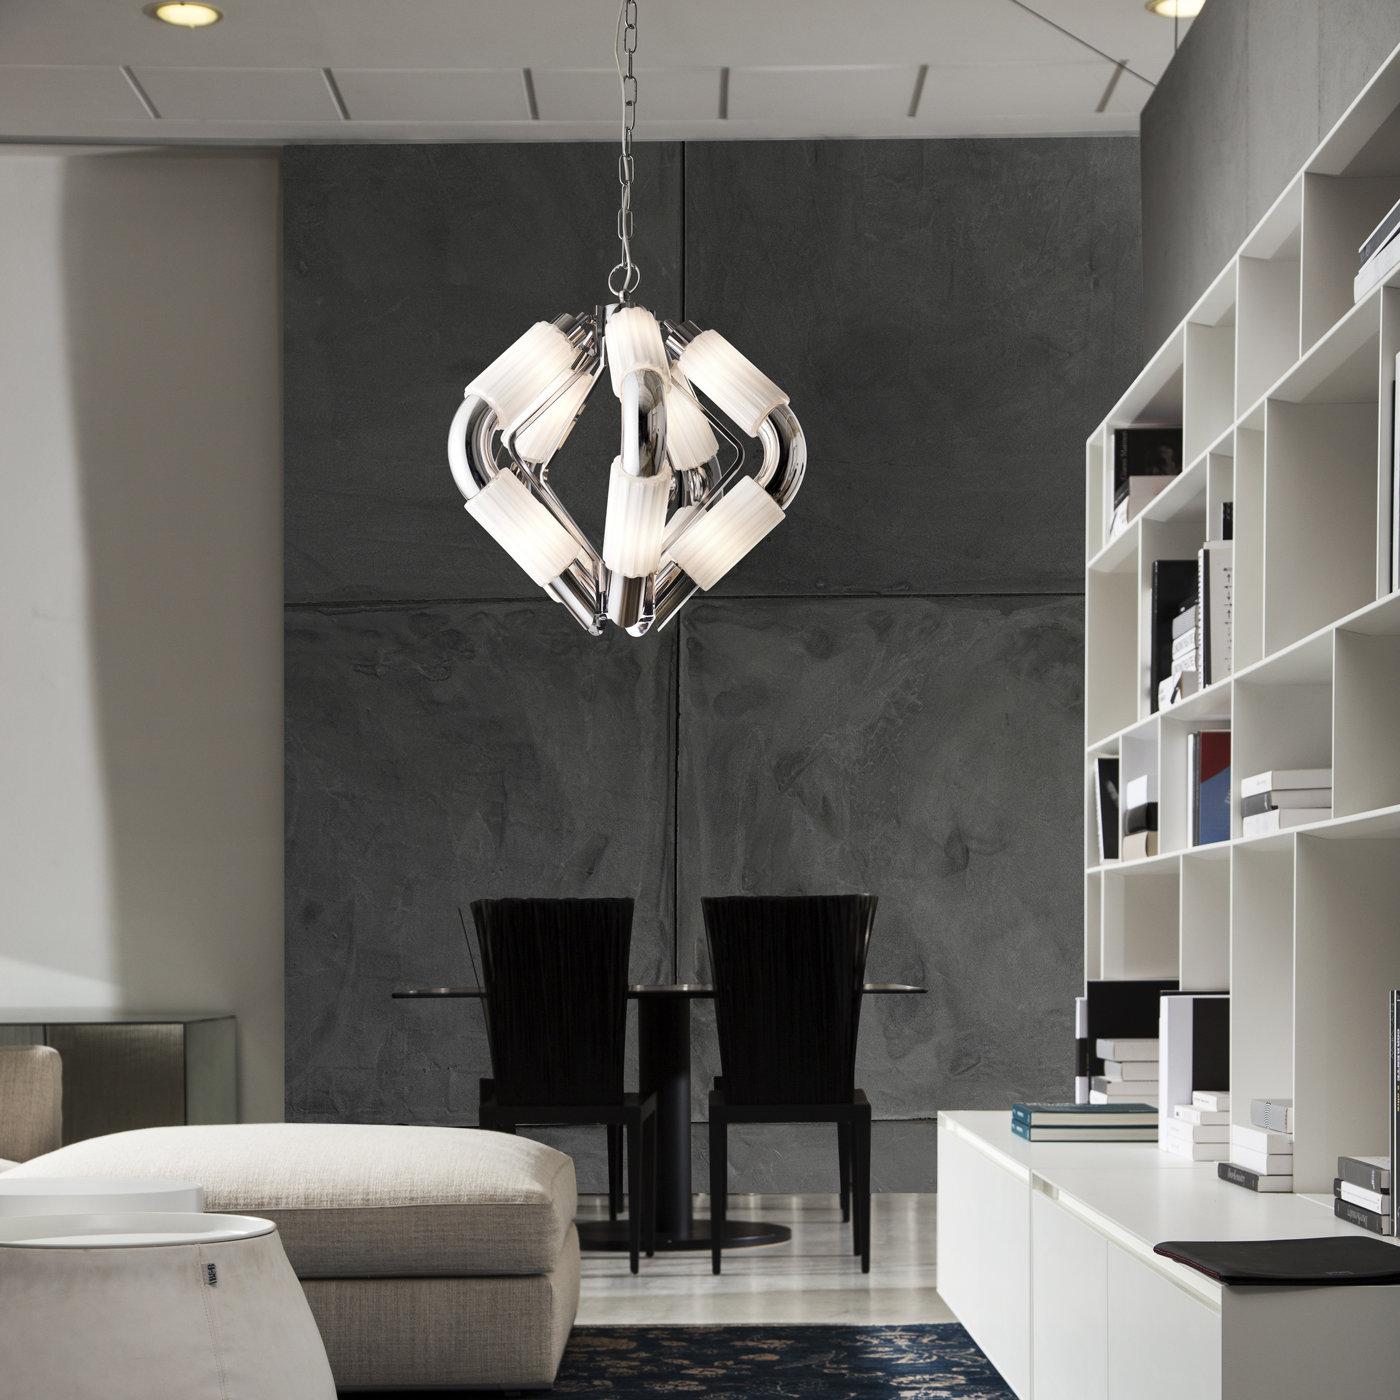 Featuring five bent cylindrical sections in metal with a bright chrome finish converging towards their extremities, this stunning pendant diffuses an intense and evocative light through the 10 cylindrical grooved shades in white glass hosting two